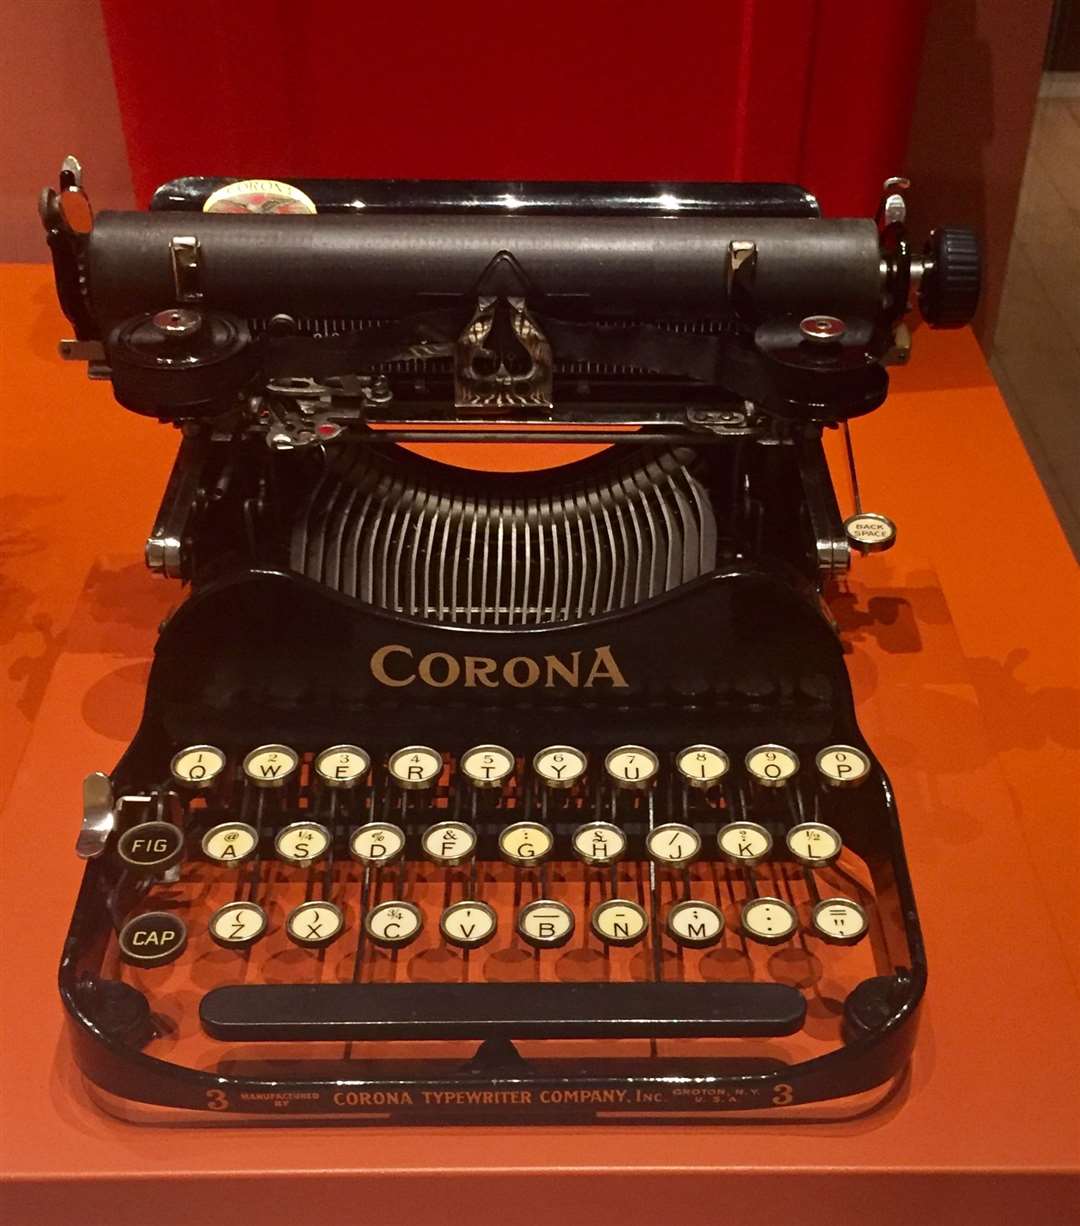 Corona 3 – the portable typewriter of choice for WWII war correspondents.